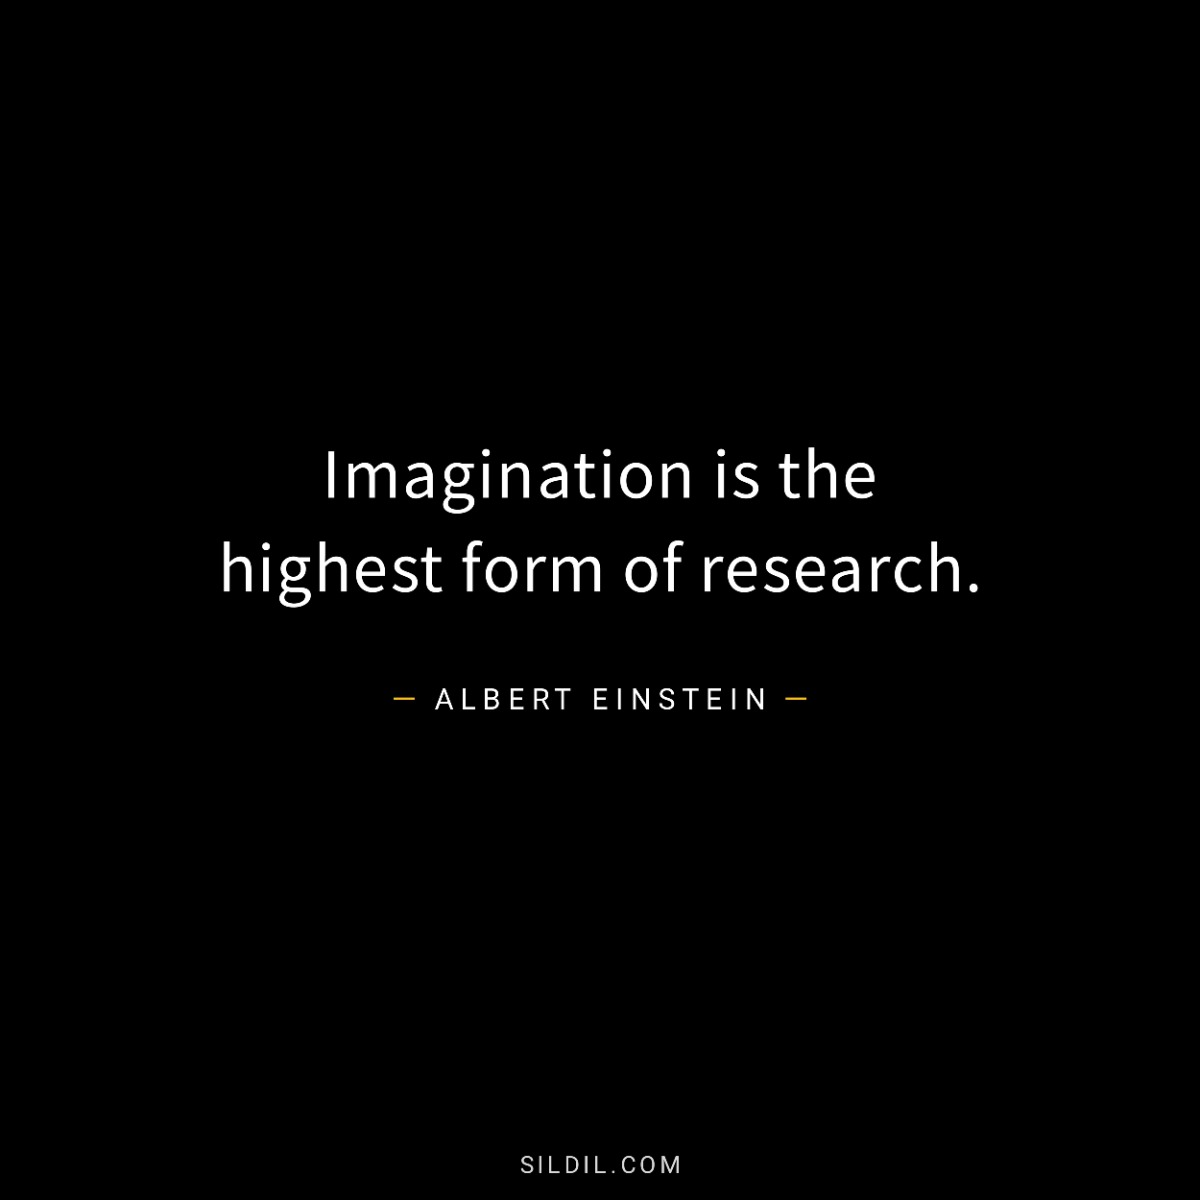 Imagination is the highest form of research.